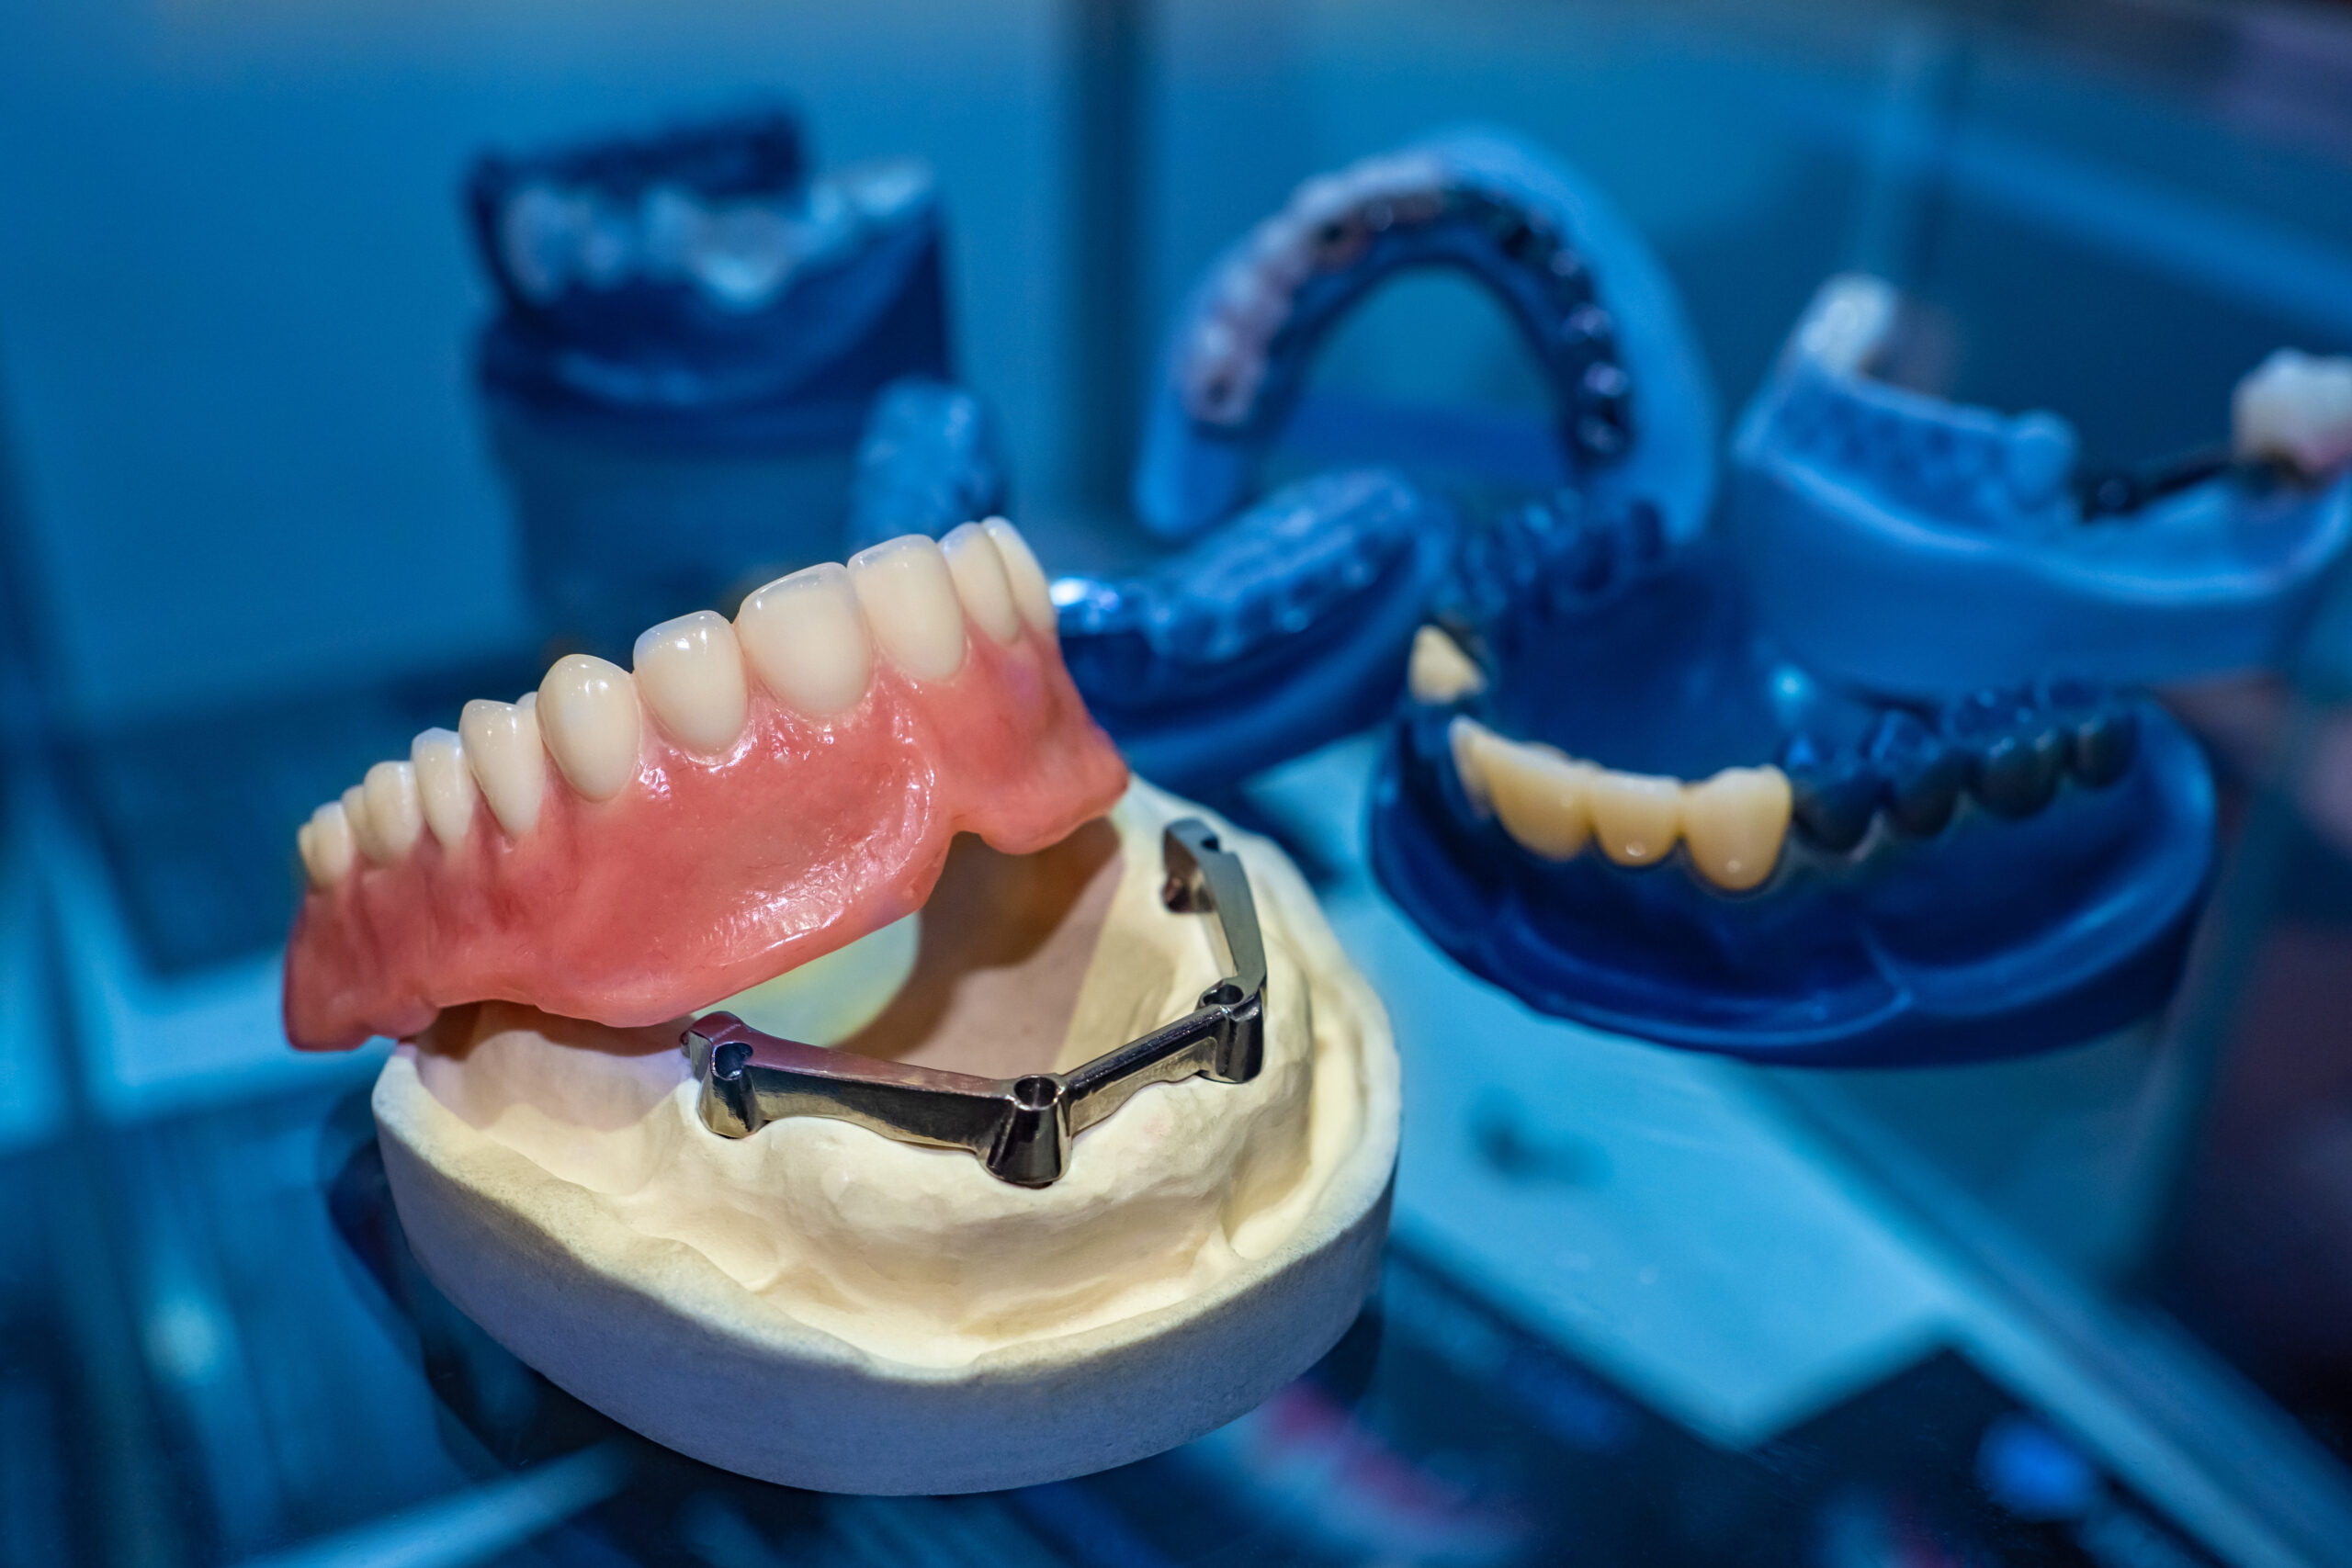 a full mouth dental prosthesis model of a lower arch on implants.